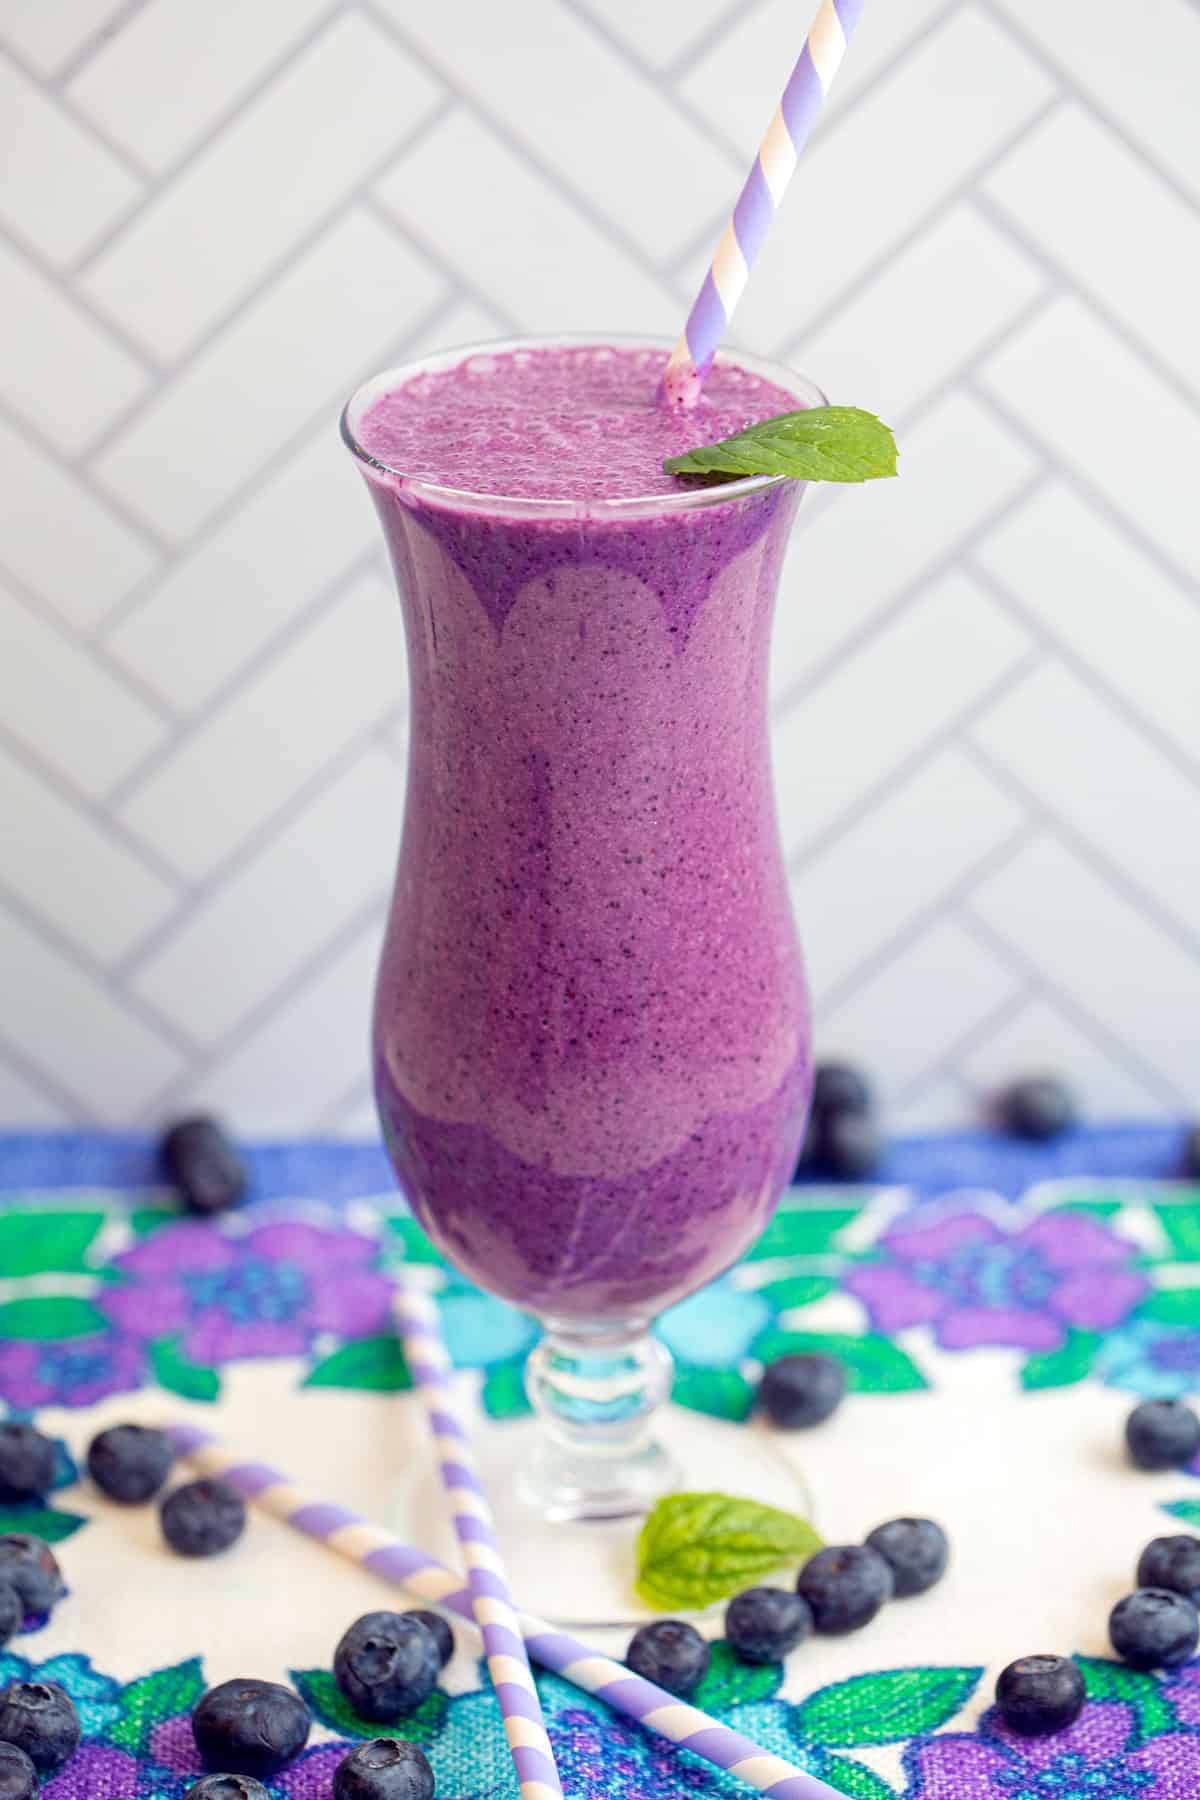 close up shot of a blueberry smoothie garnished with mine leaf on a table.